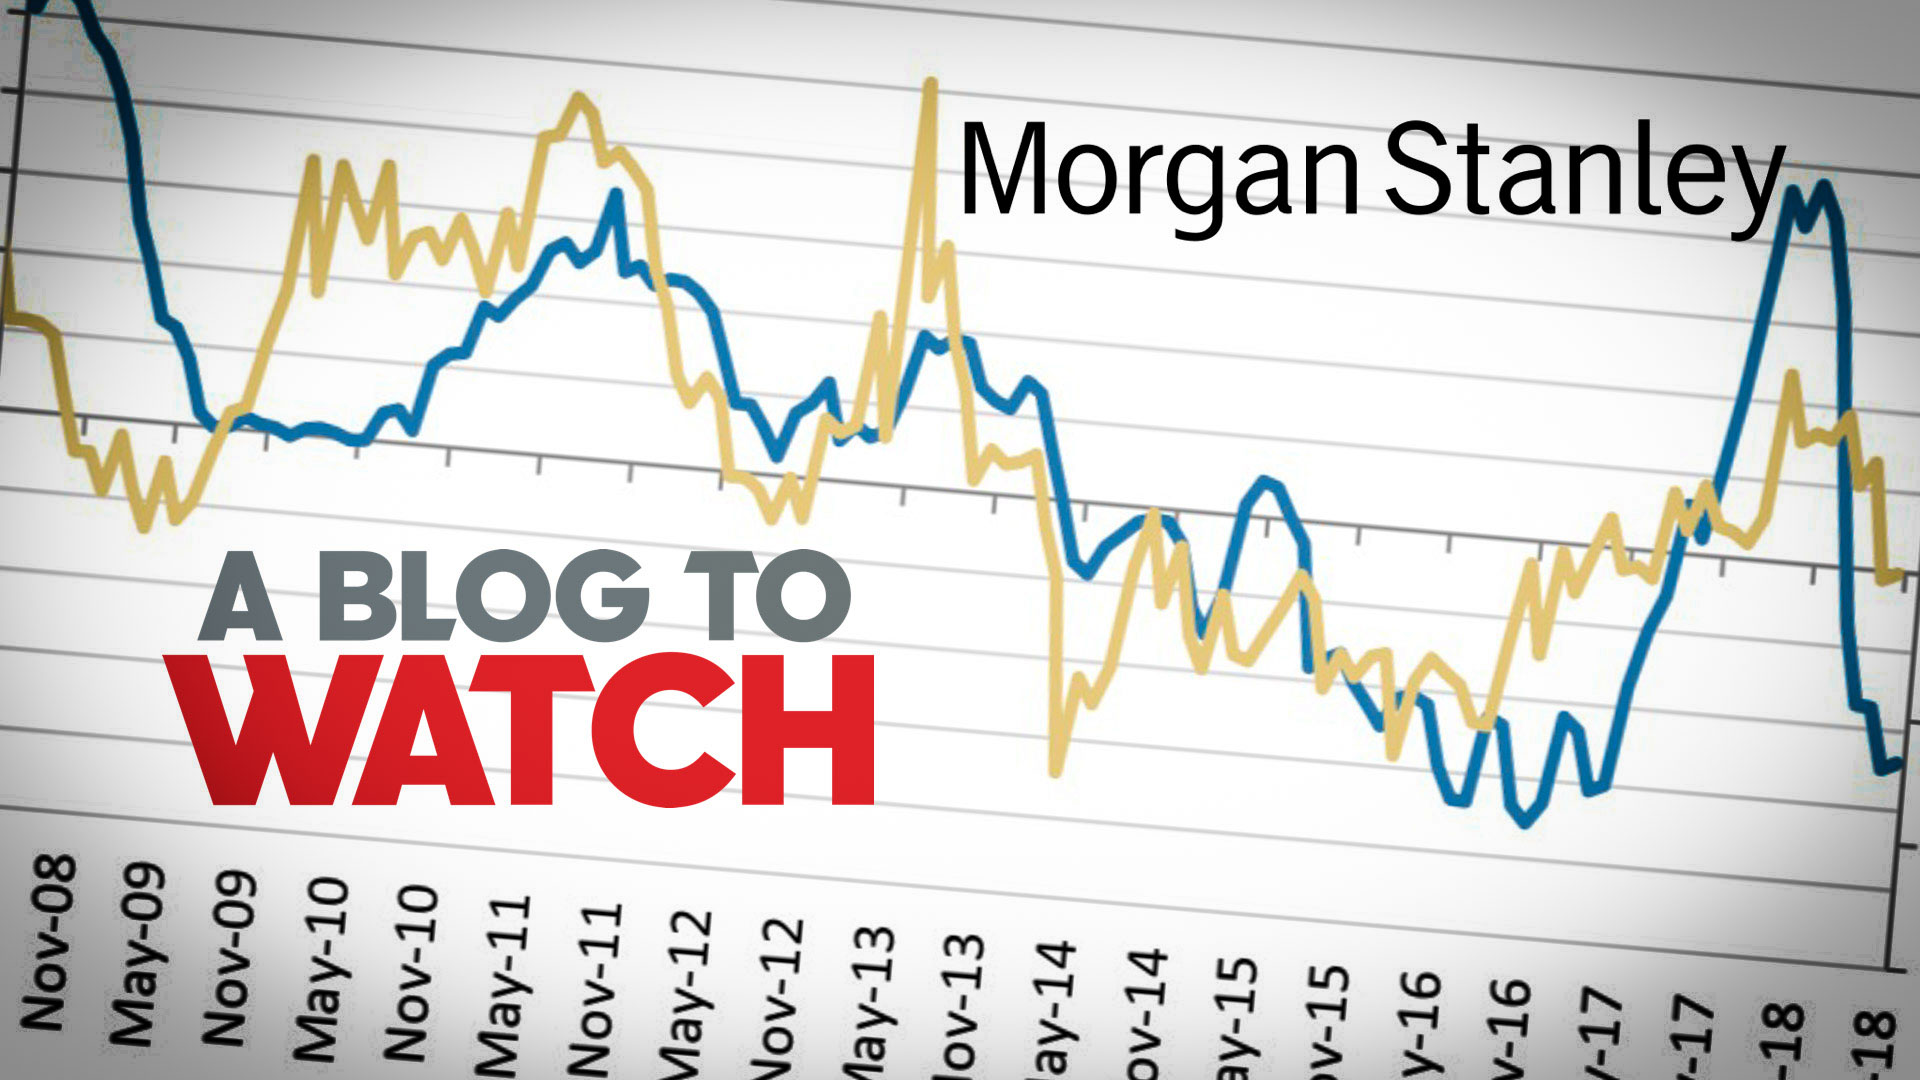 aBlogtoWatch Perspective: Morgan Stanley Report On The Watch Industry’s Biggest Problems In 2019 & Beyond